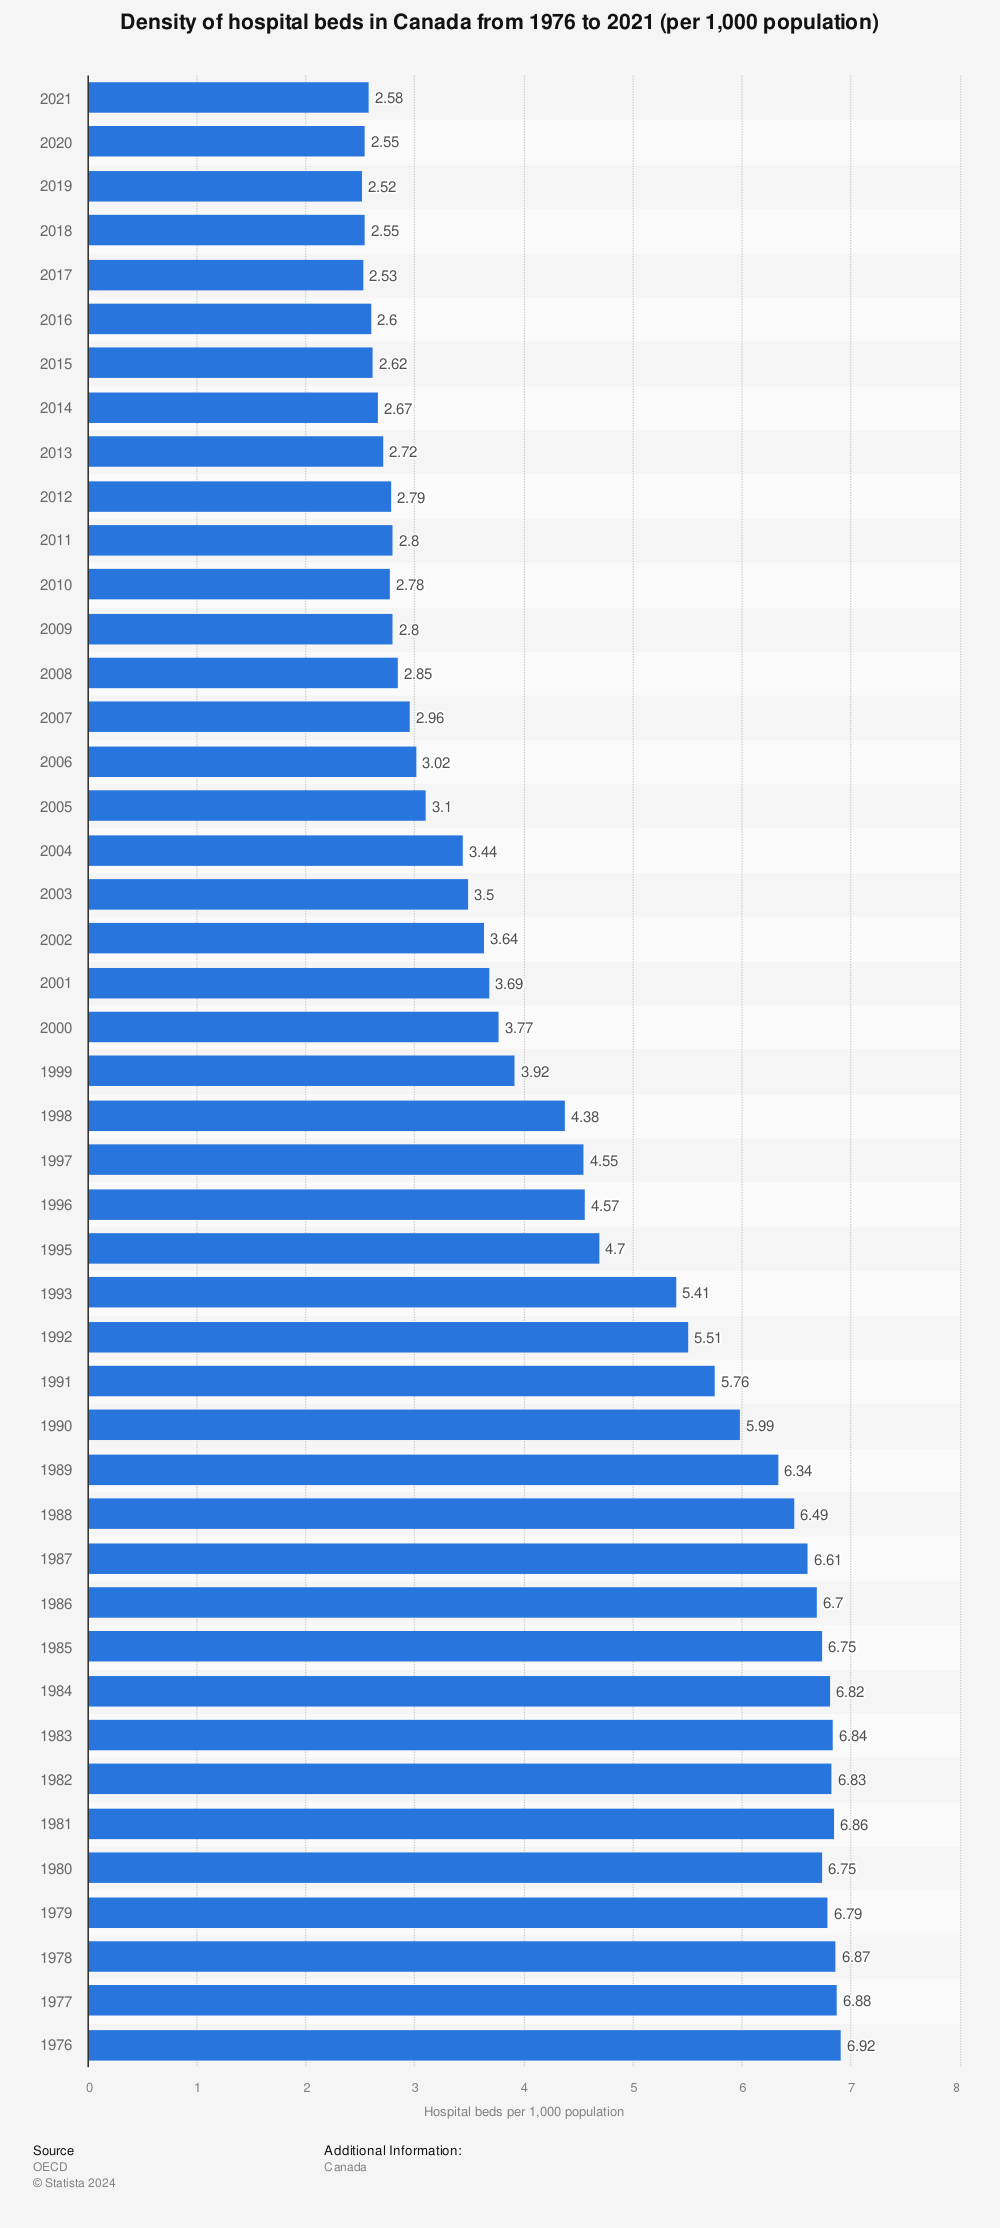 Statistic: Density of hospital beds in Canada from 1976 to 2020 (per 1,000 population) | Statista